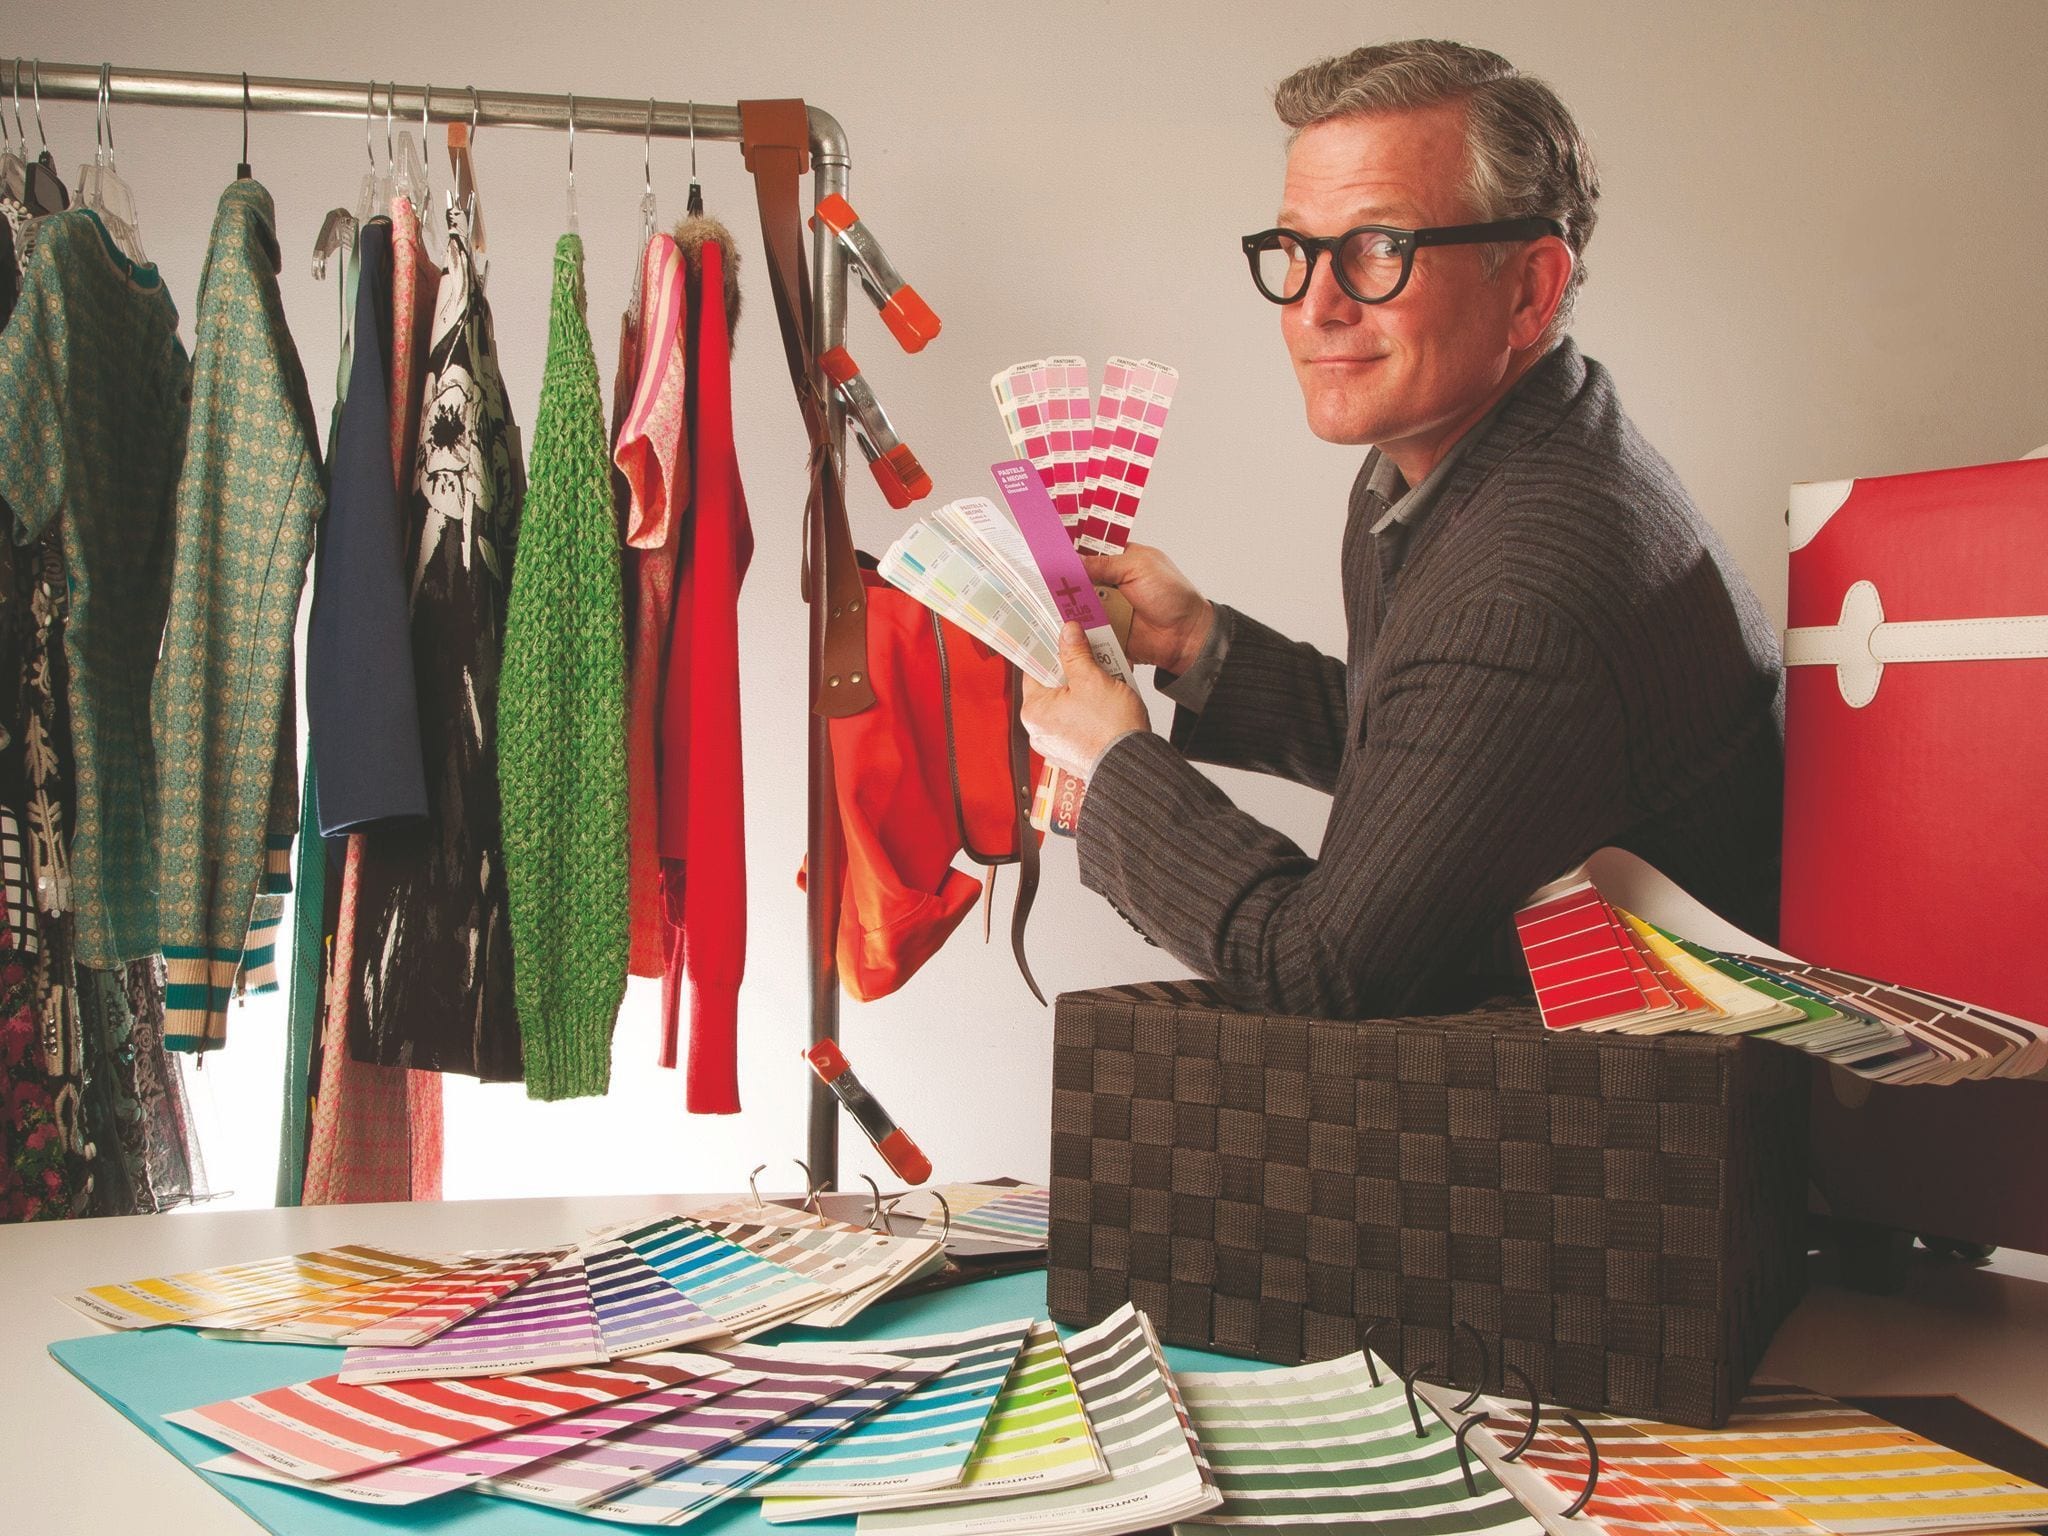 A man looks through color swatches while searching through women's clothing.